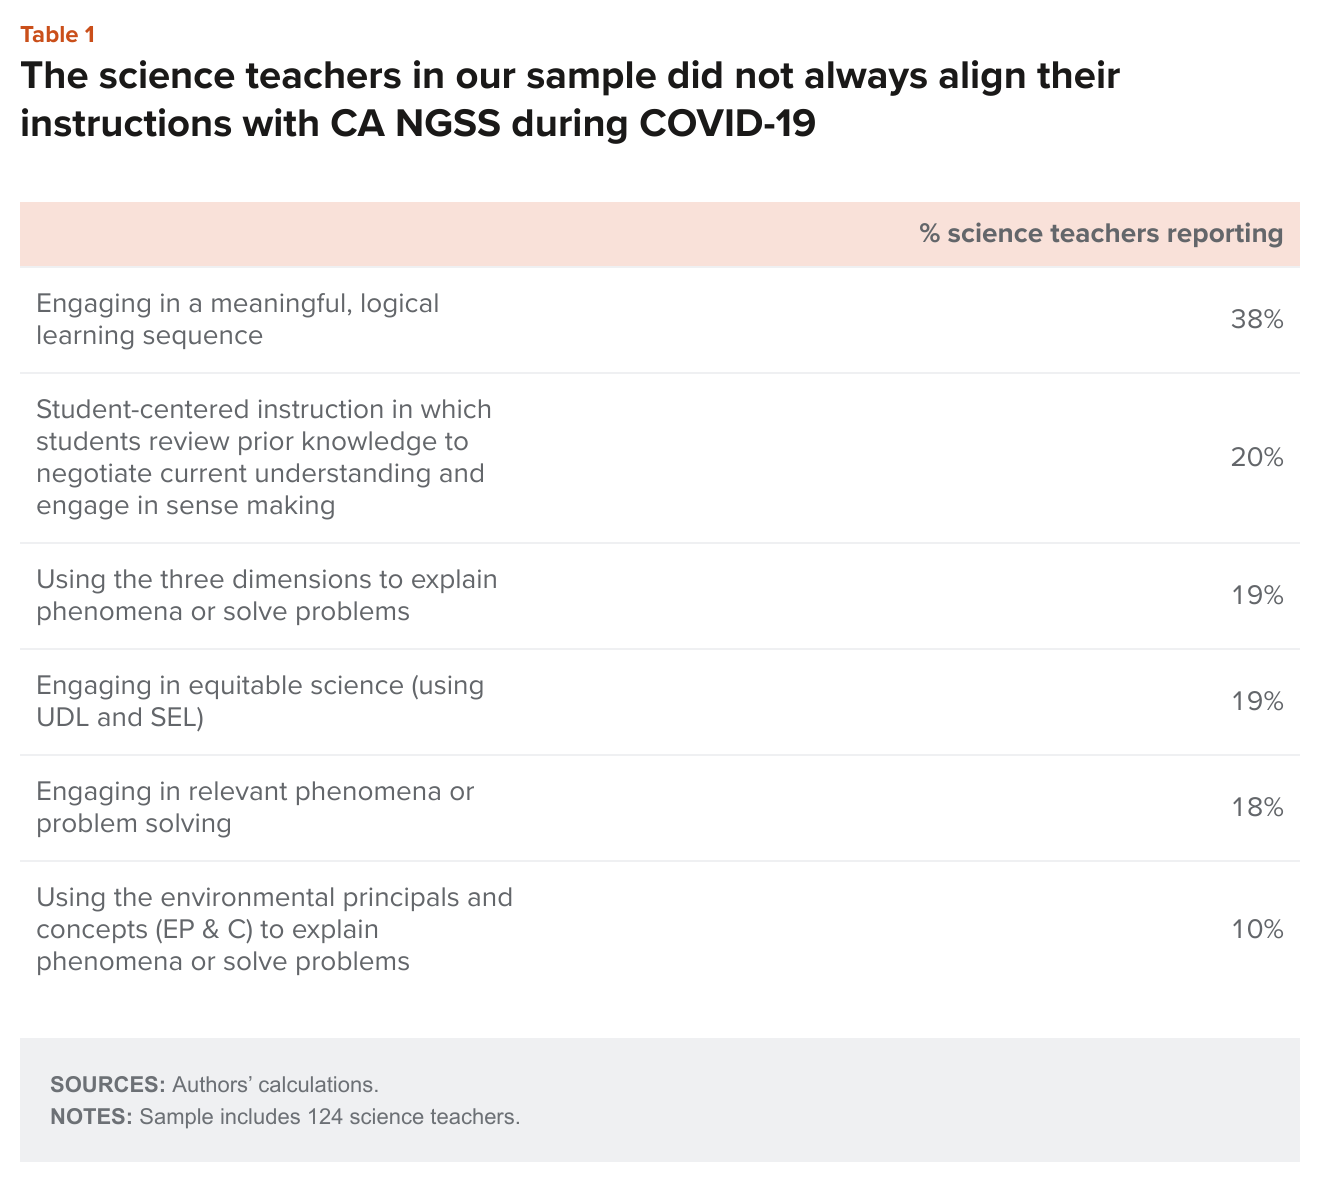 table 1 - The science teachers in our sample did not always align their instructions with CA NGSS during COVID-19